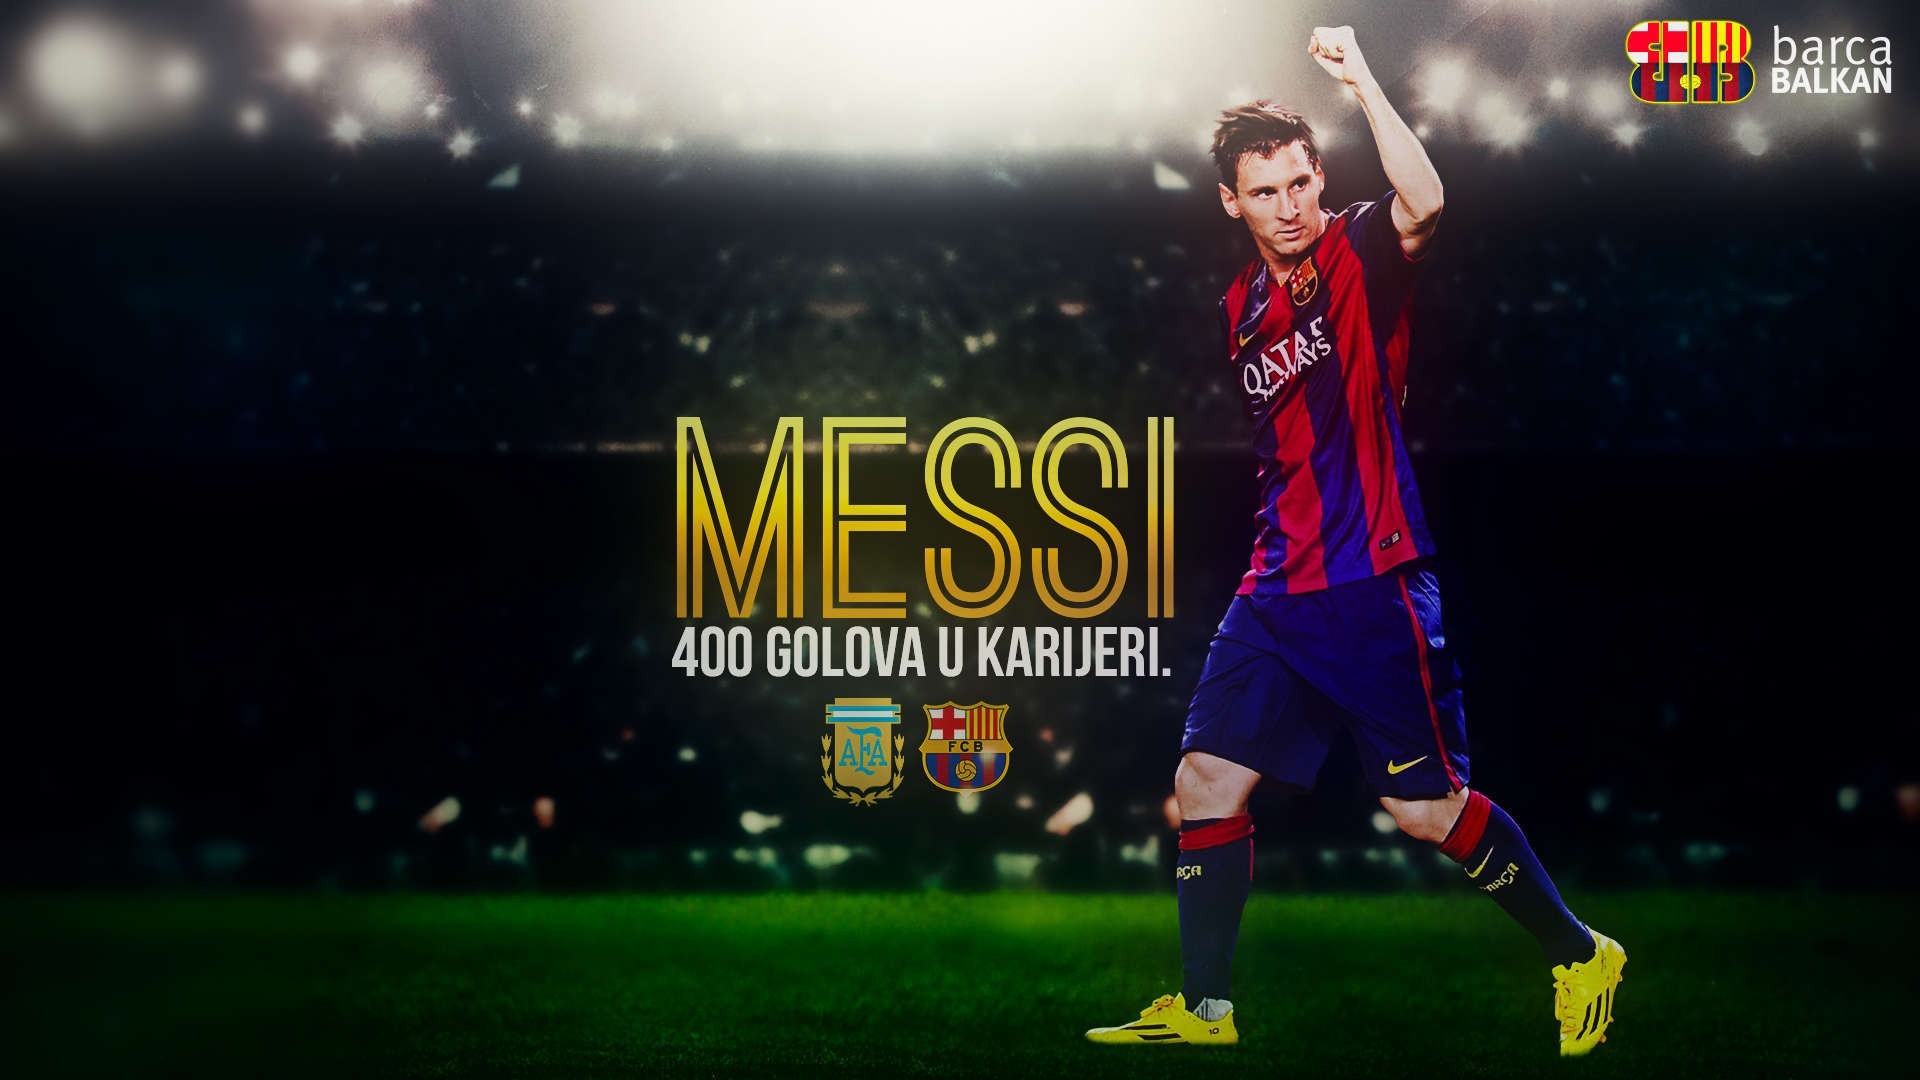 Free OnePlus One A0001 Lionel Messi 2012 Live Wallpaper Software Download  in Sport Tag